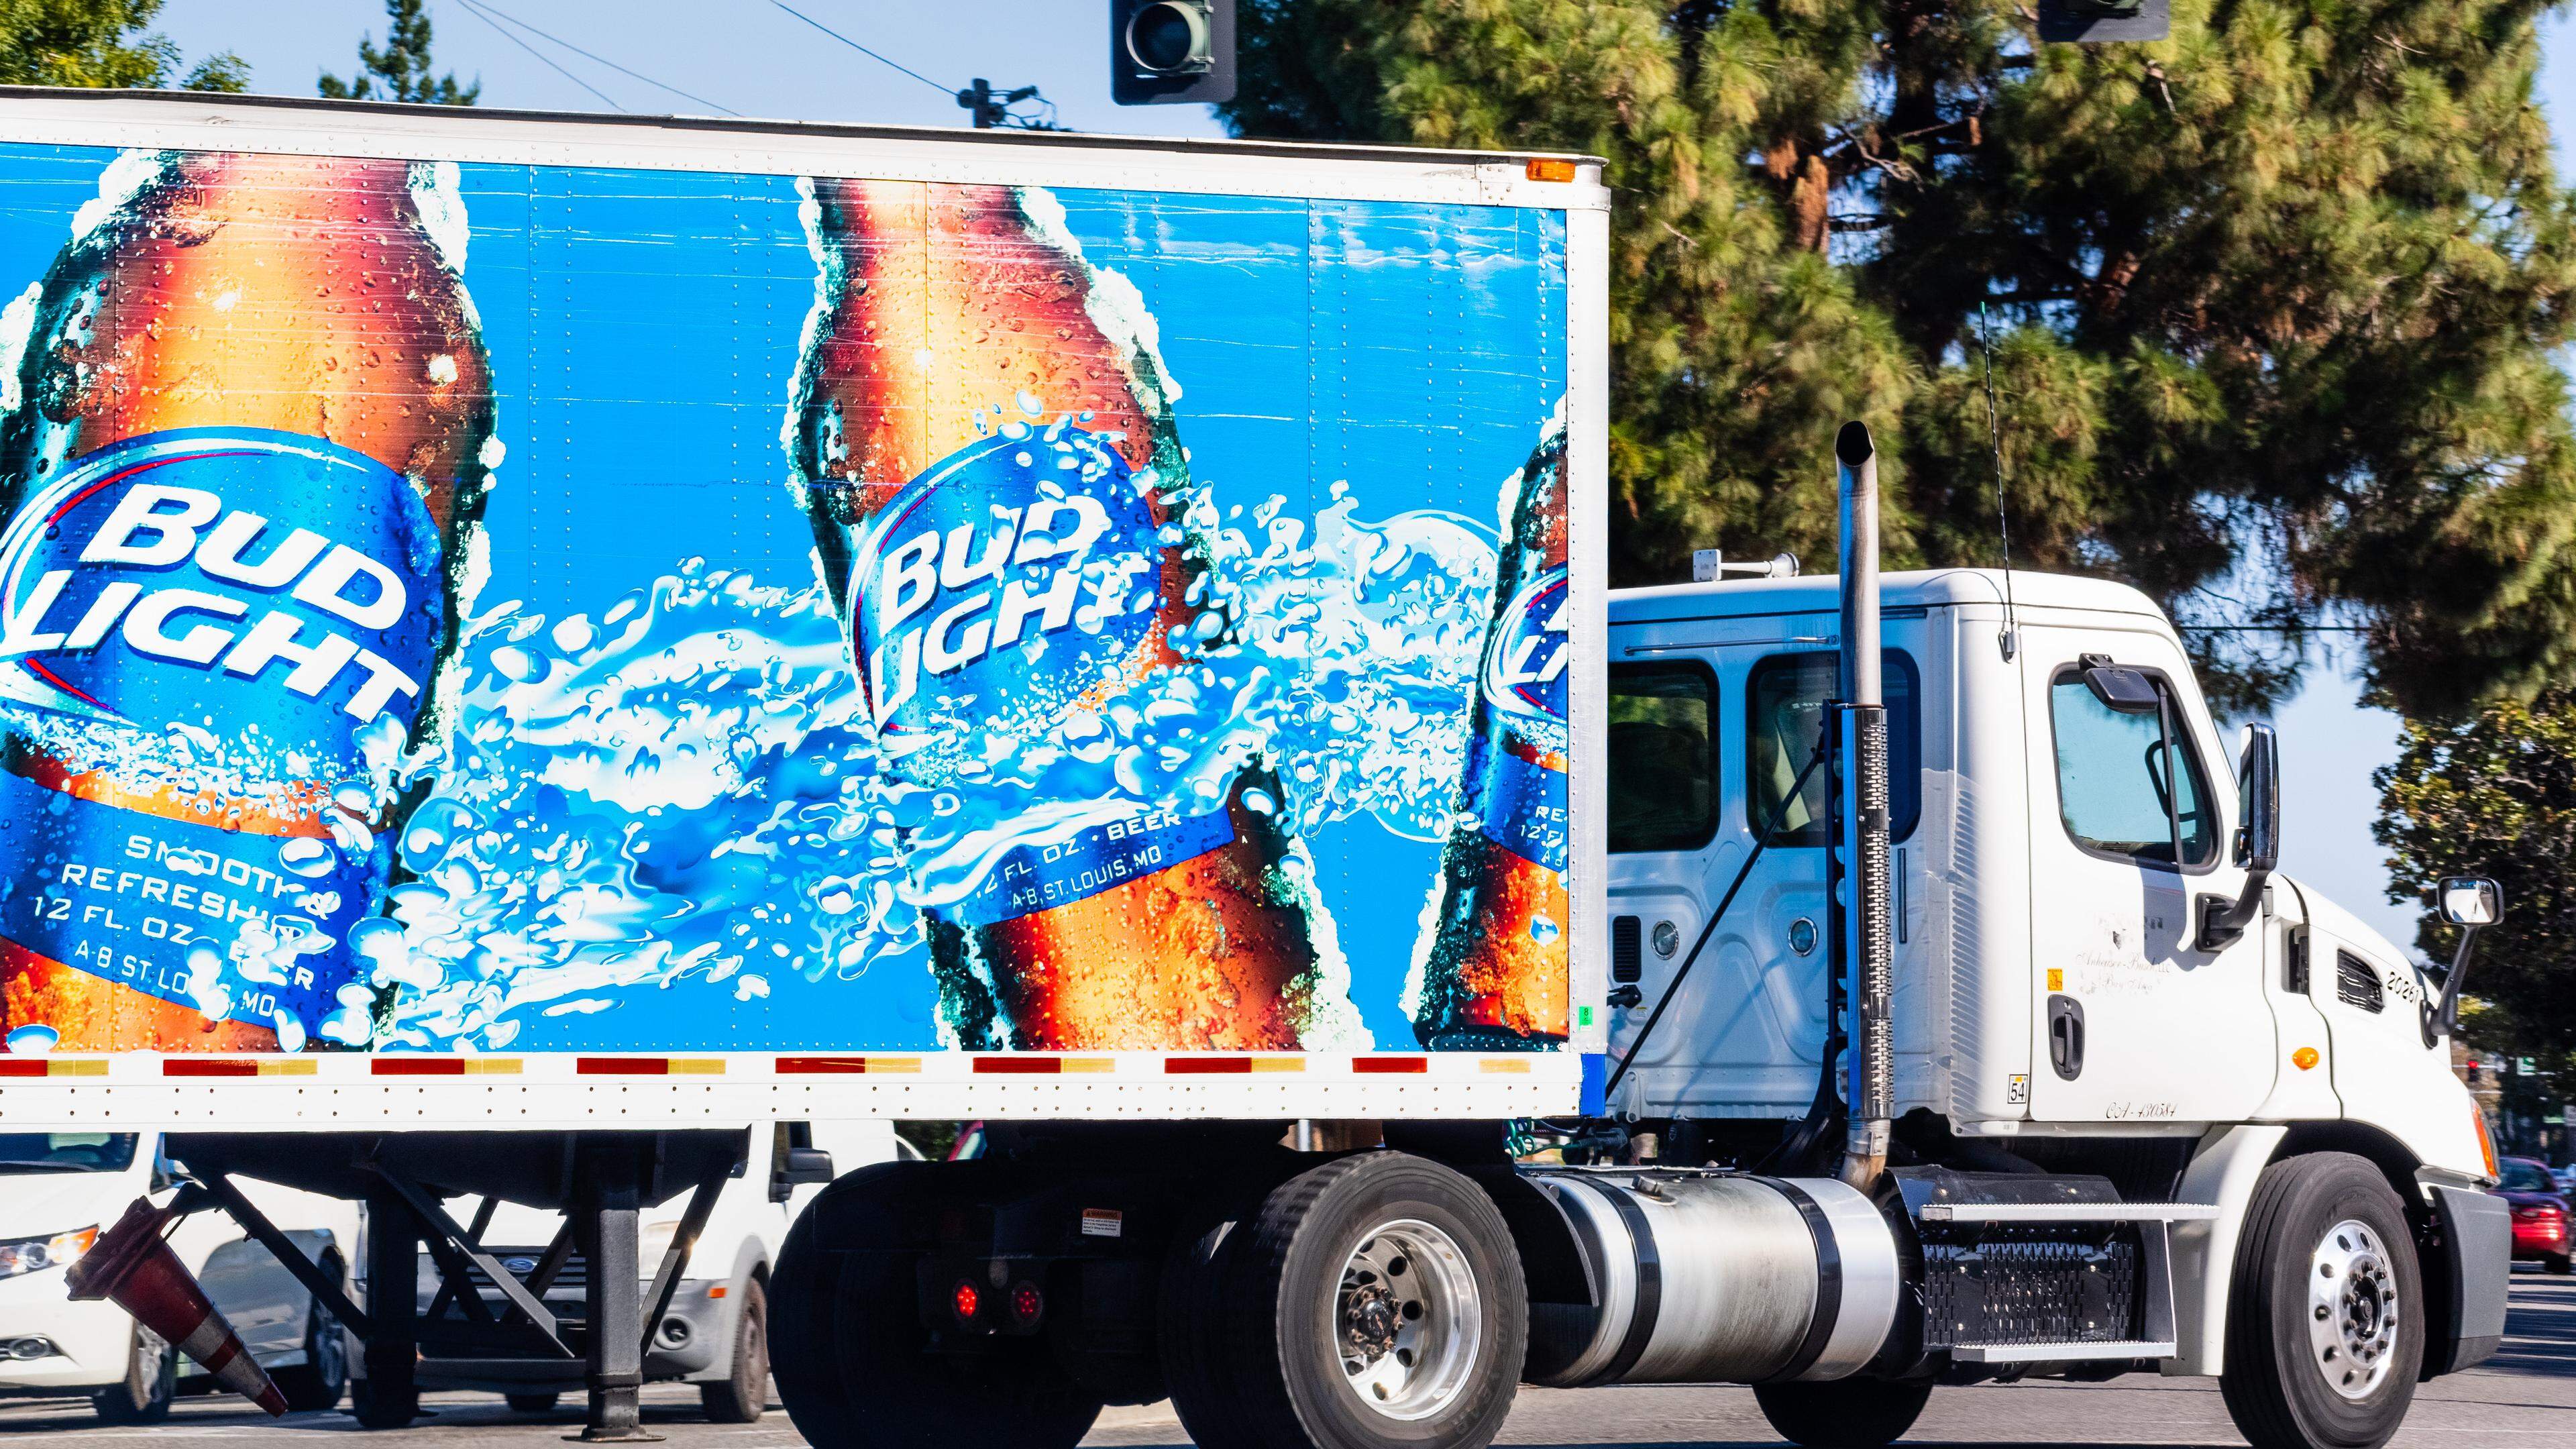 Anheuser-Busch InBev NV, which owns the Budweiser brand, posted better-than-expected volumes and sales in North America as European stocks continued their rally since April